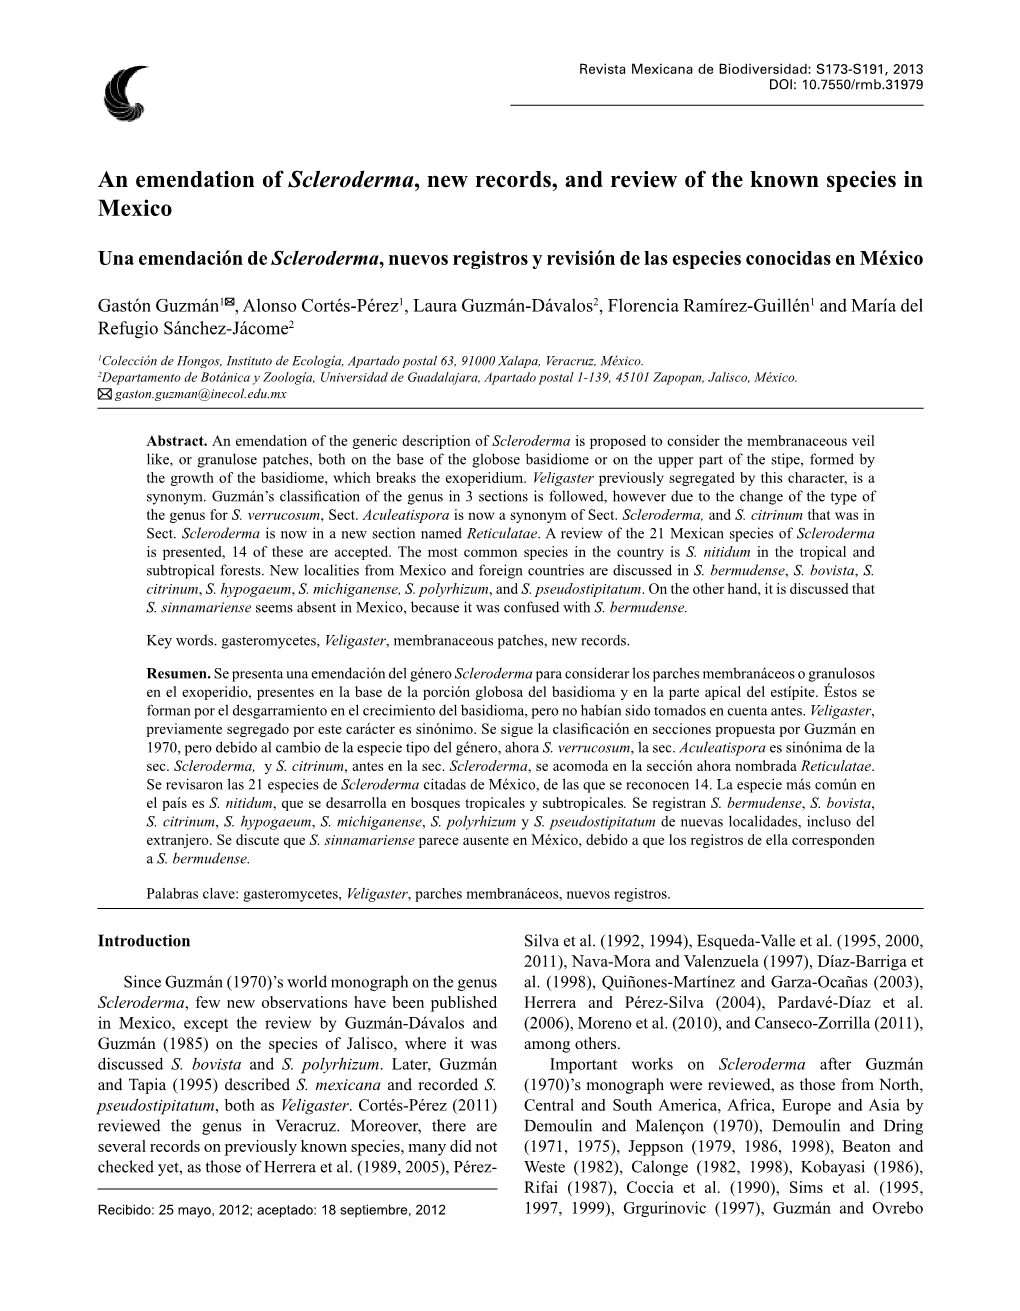 An Emendation of Scleroderma, New Records, and Review of the Known Species in Mexico